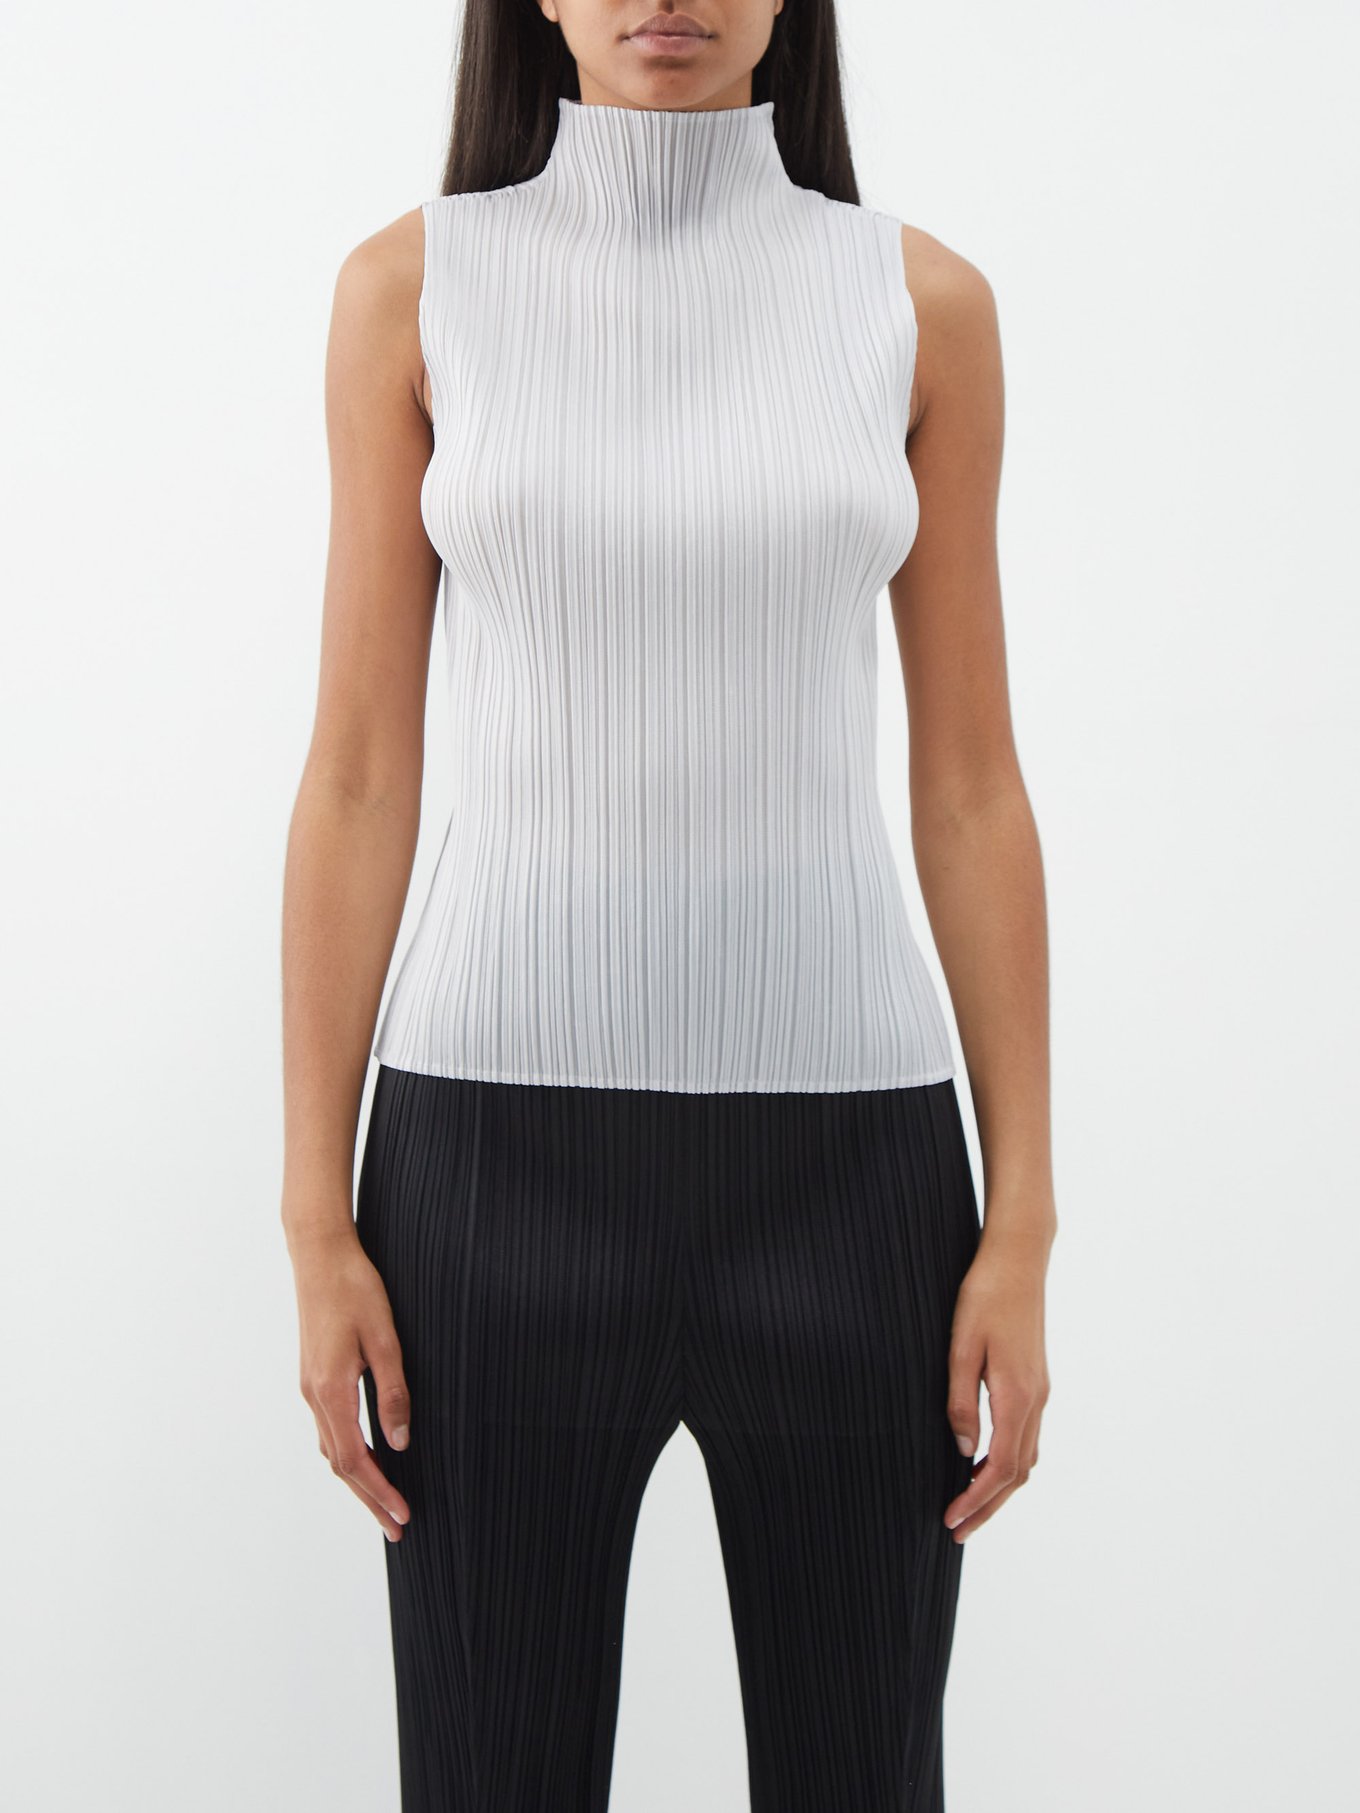 Technical-pleated tank top video